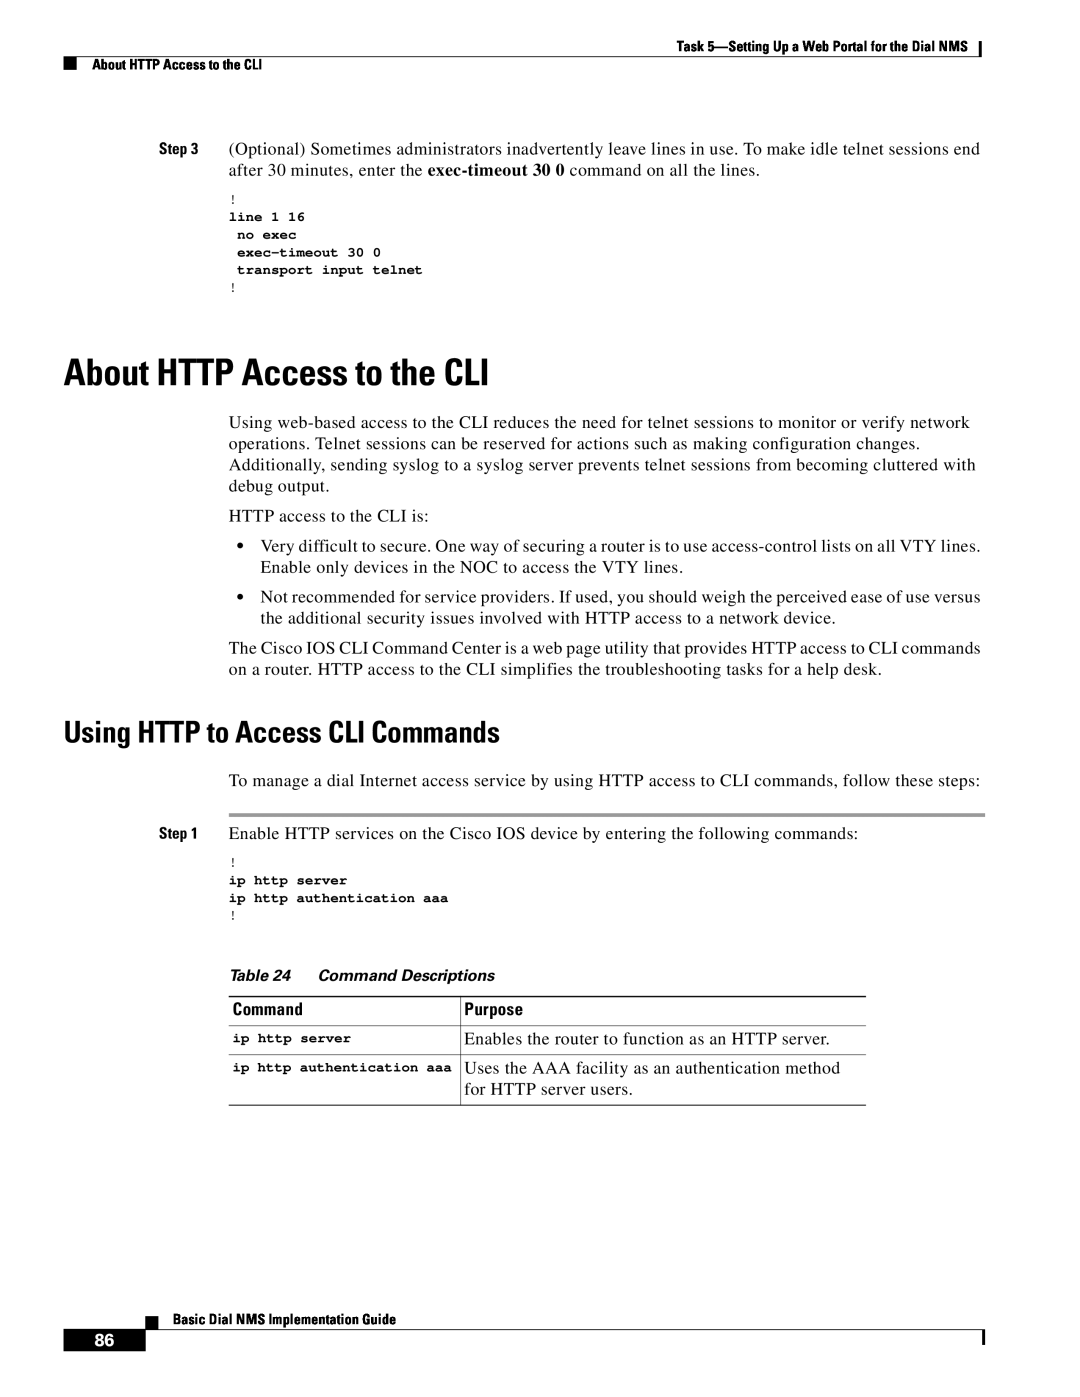 Cisco Systems Dial NMS manual About HTTP Access to the CLI, Using HTTP to Access CLI Commands 